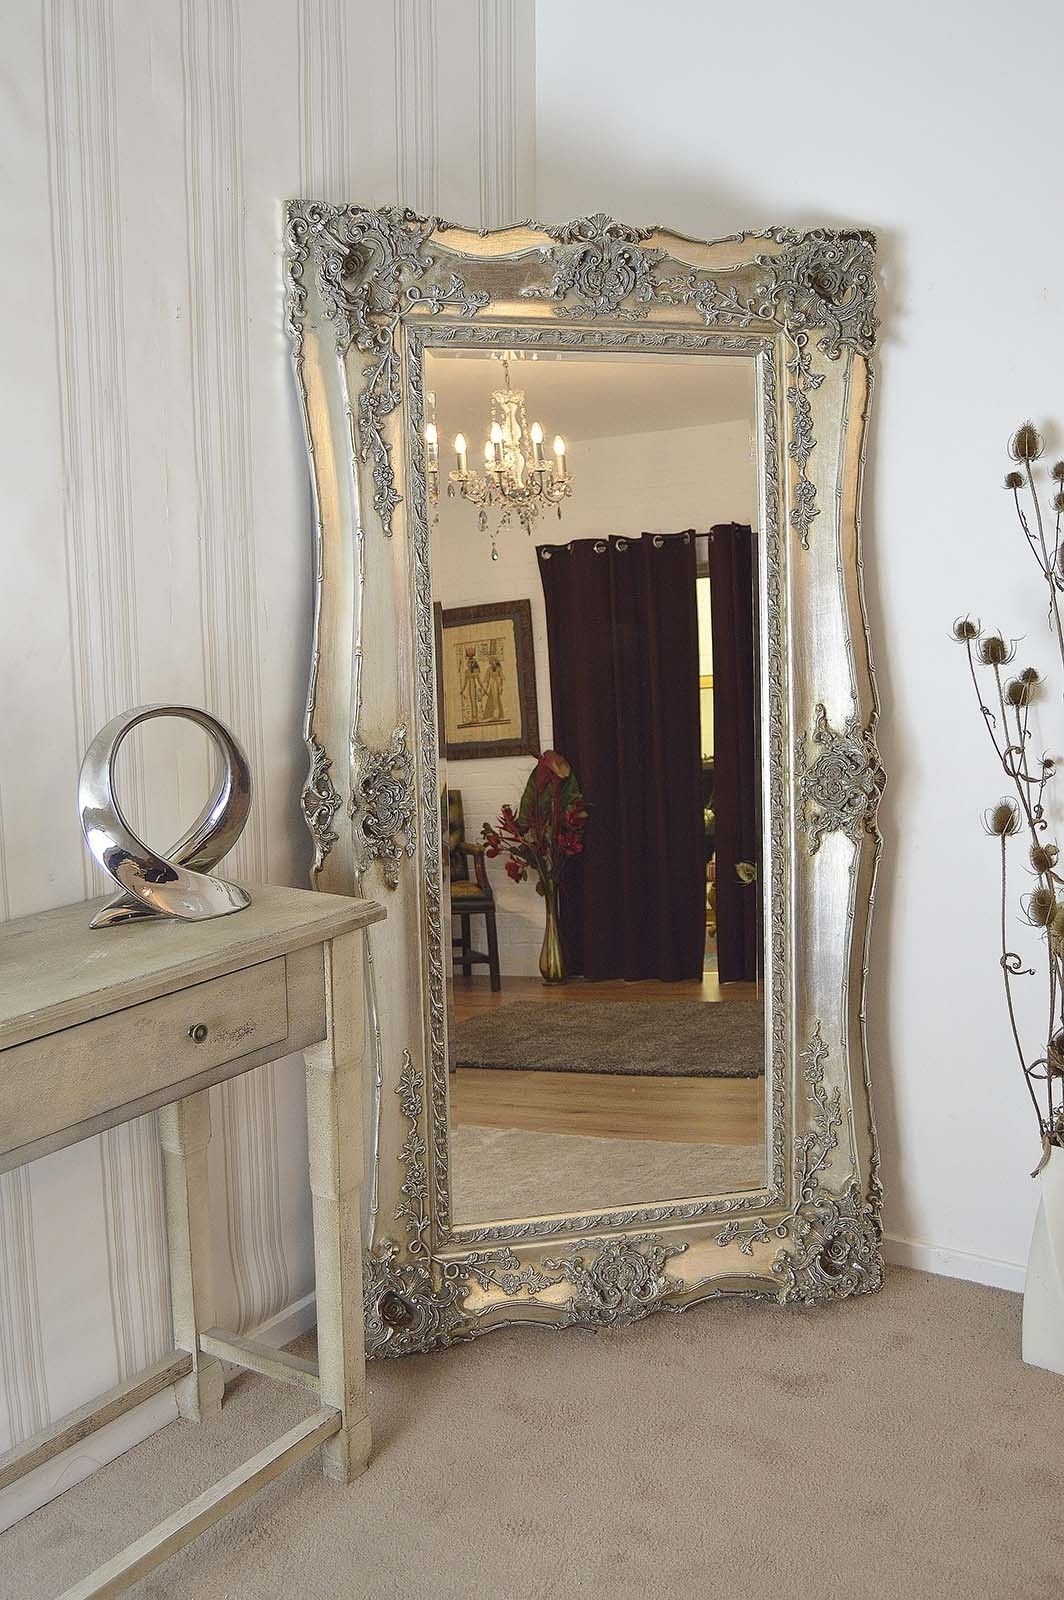 Bedroom Furniture Large Gold Mirror Free Standing Mirror Wooden Within Antique Wall Mirrors Large (View 2 of 15)